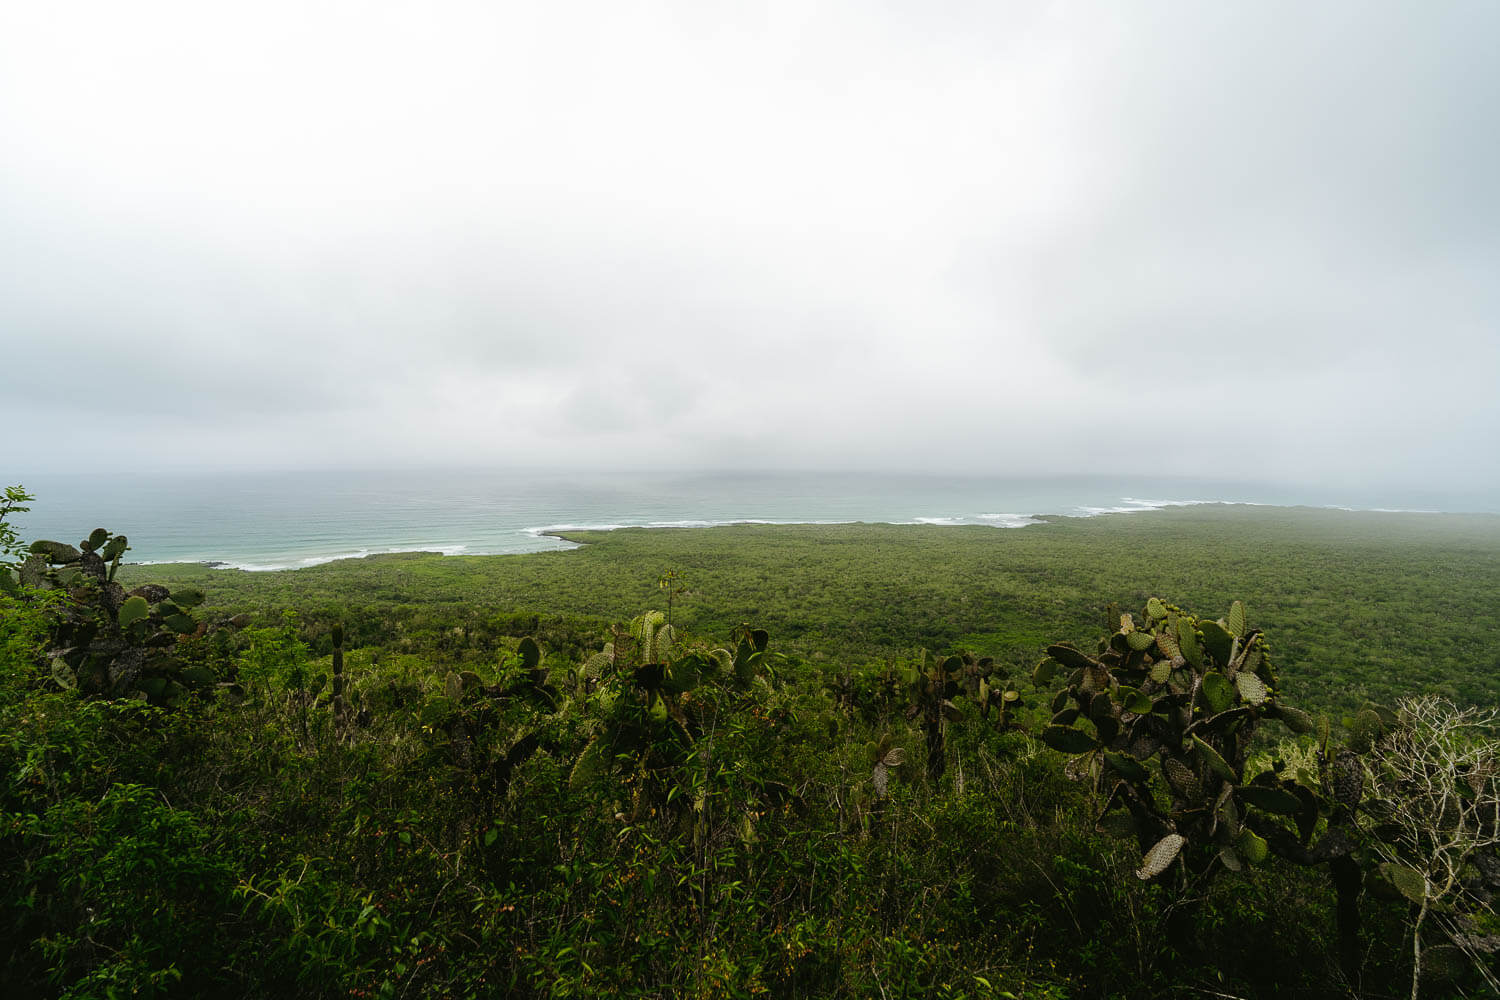 The view from El Radar viewpoint